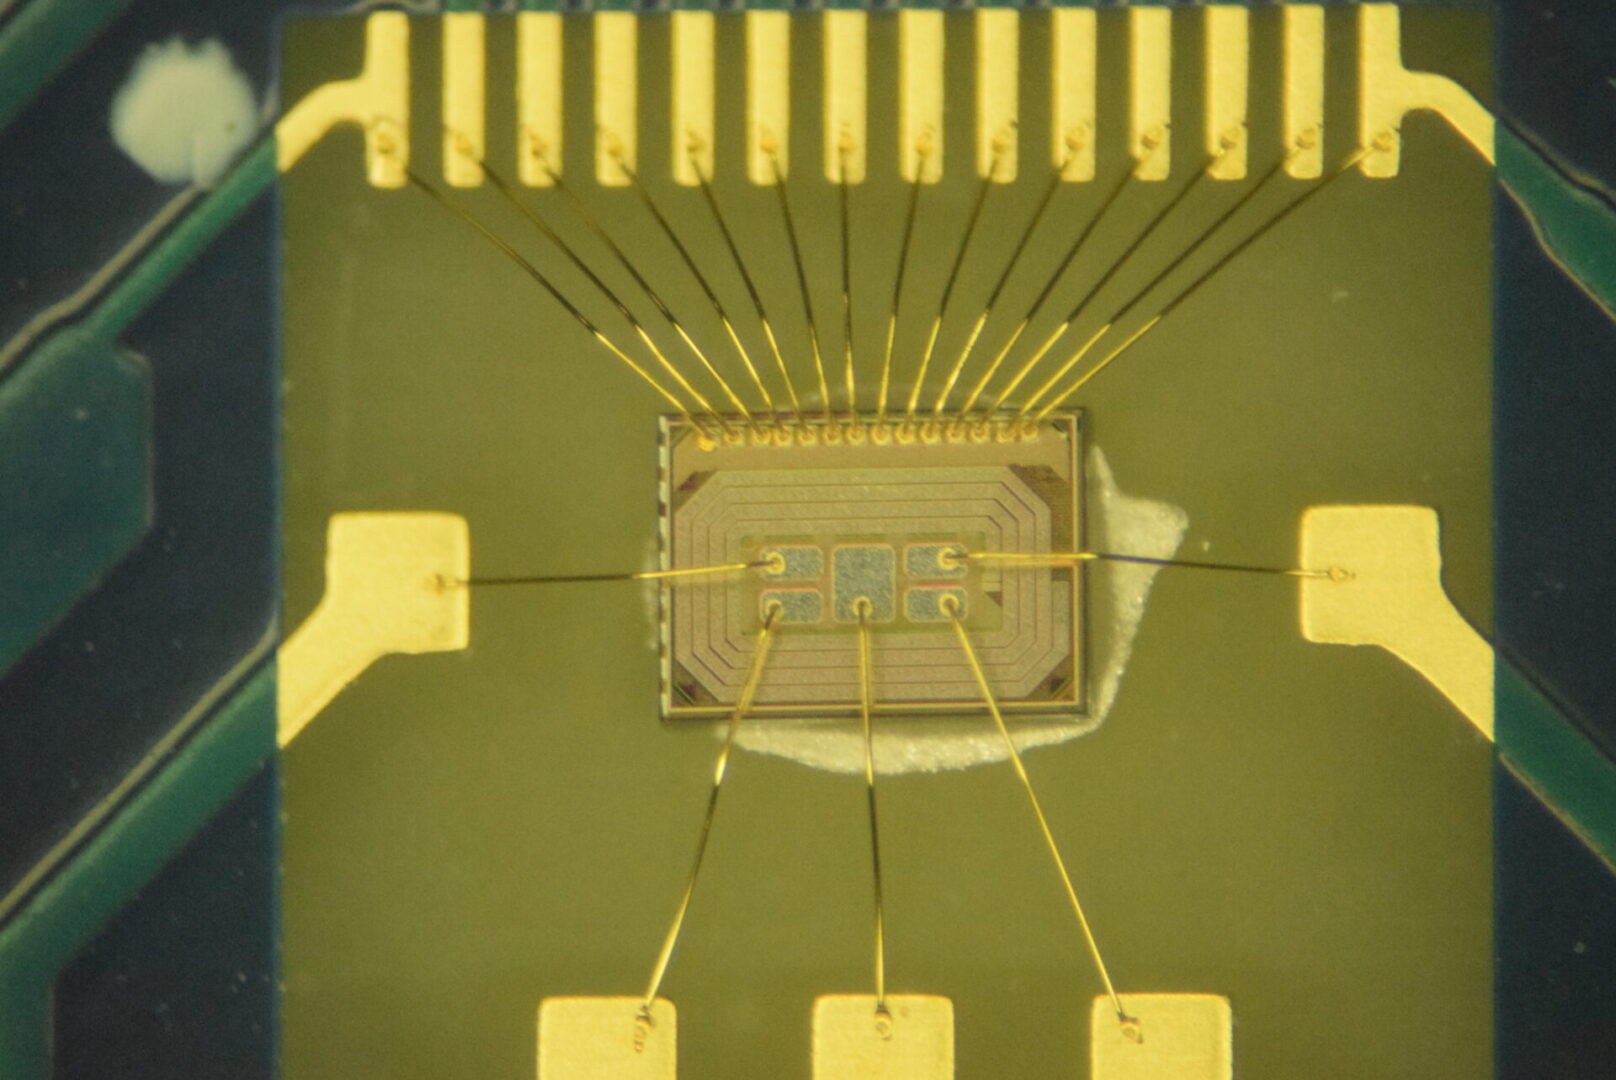 A close up of the inside of an electronic device